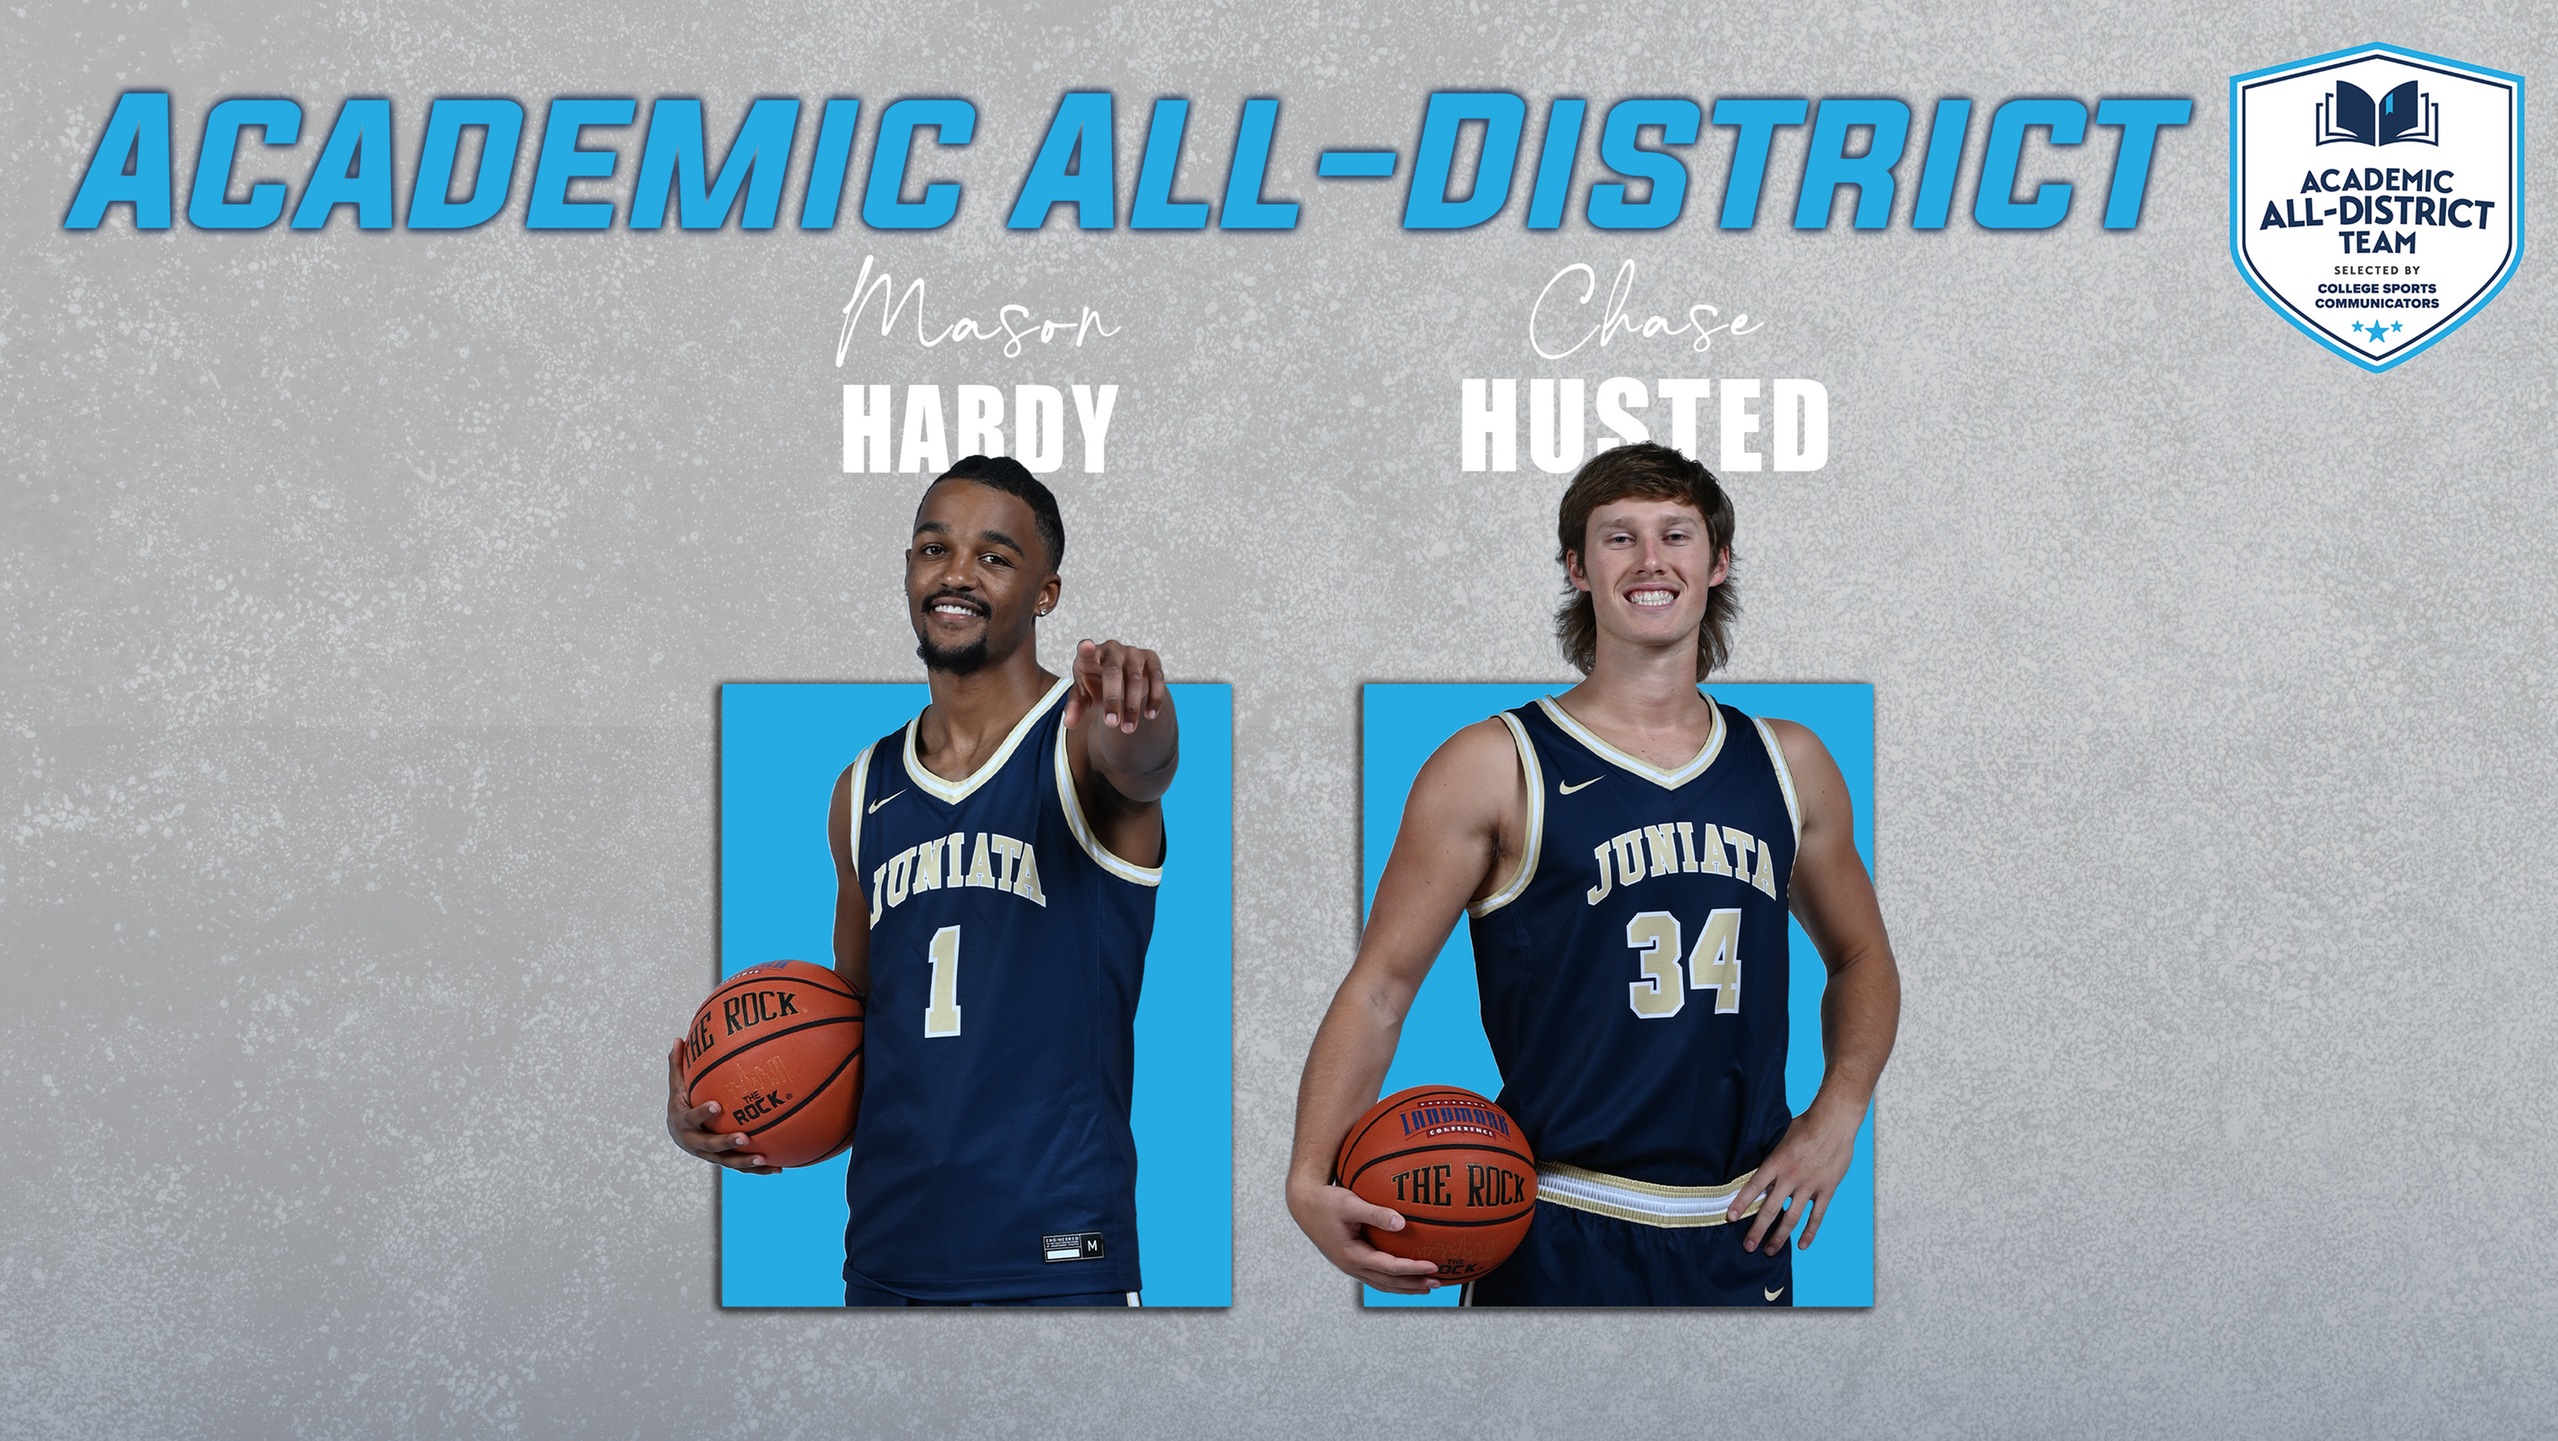 Hardy and Husted Named to CSC Academic All-District&reg; Men's Basketball Team